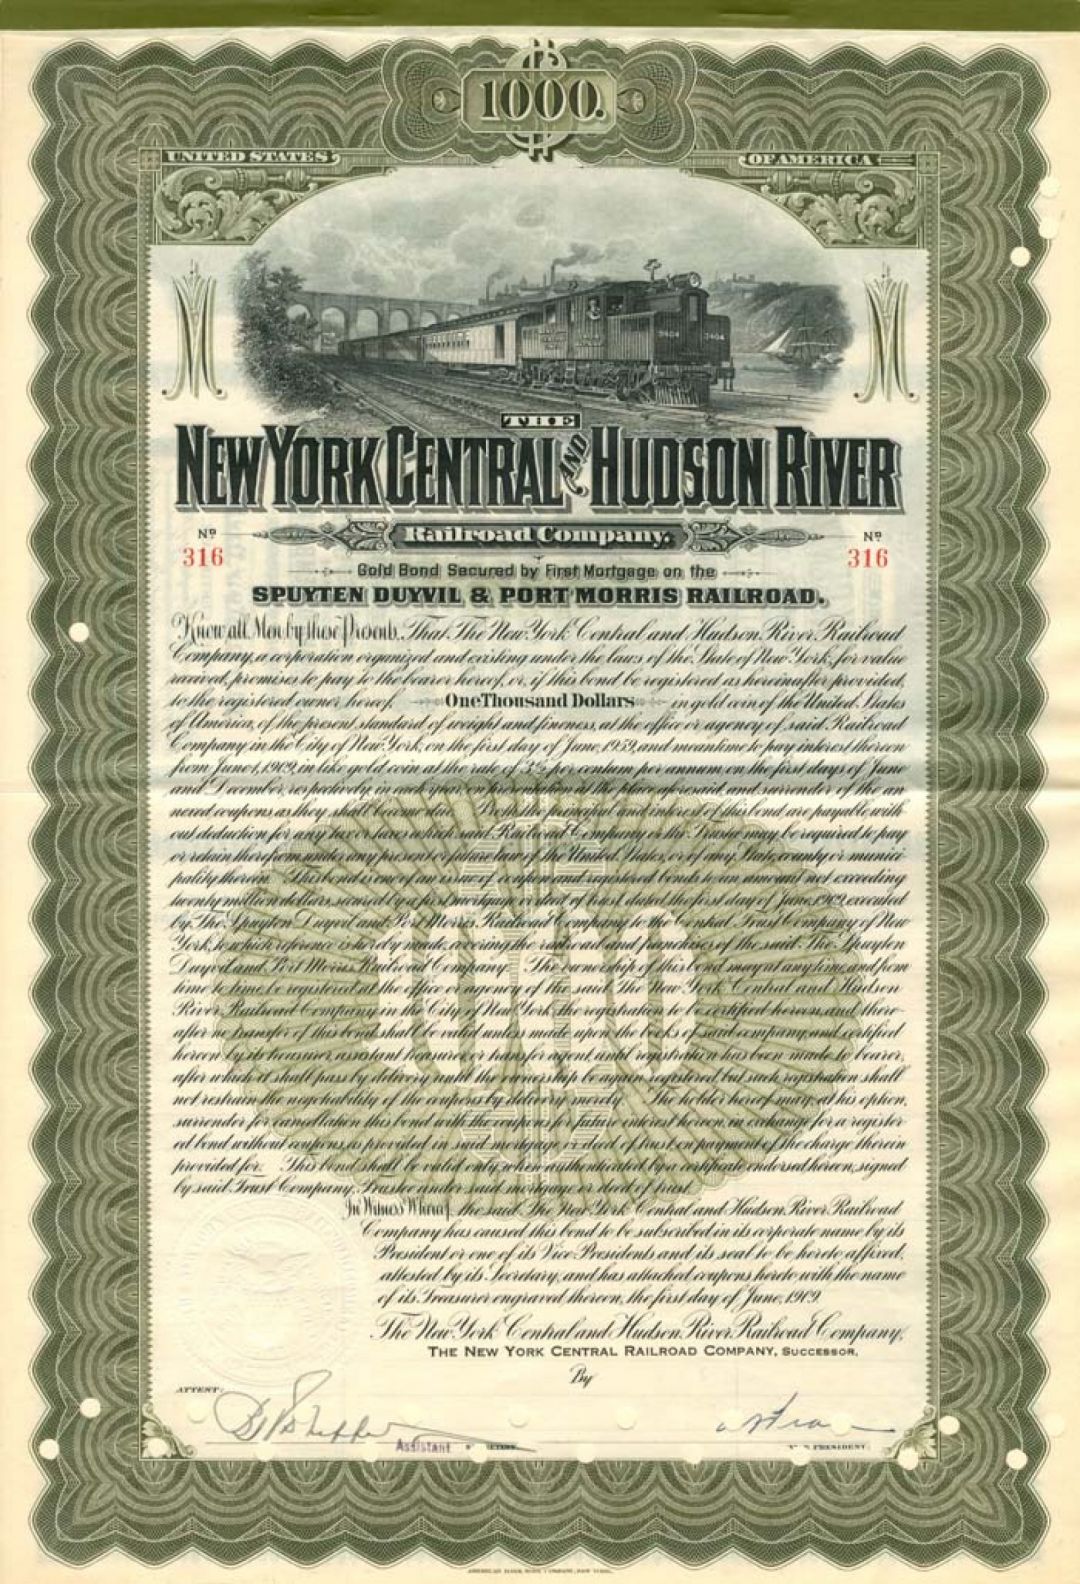 New York Central and Hudson River Railroad - $1000 Railway Gold Bond